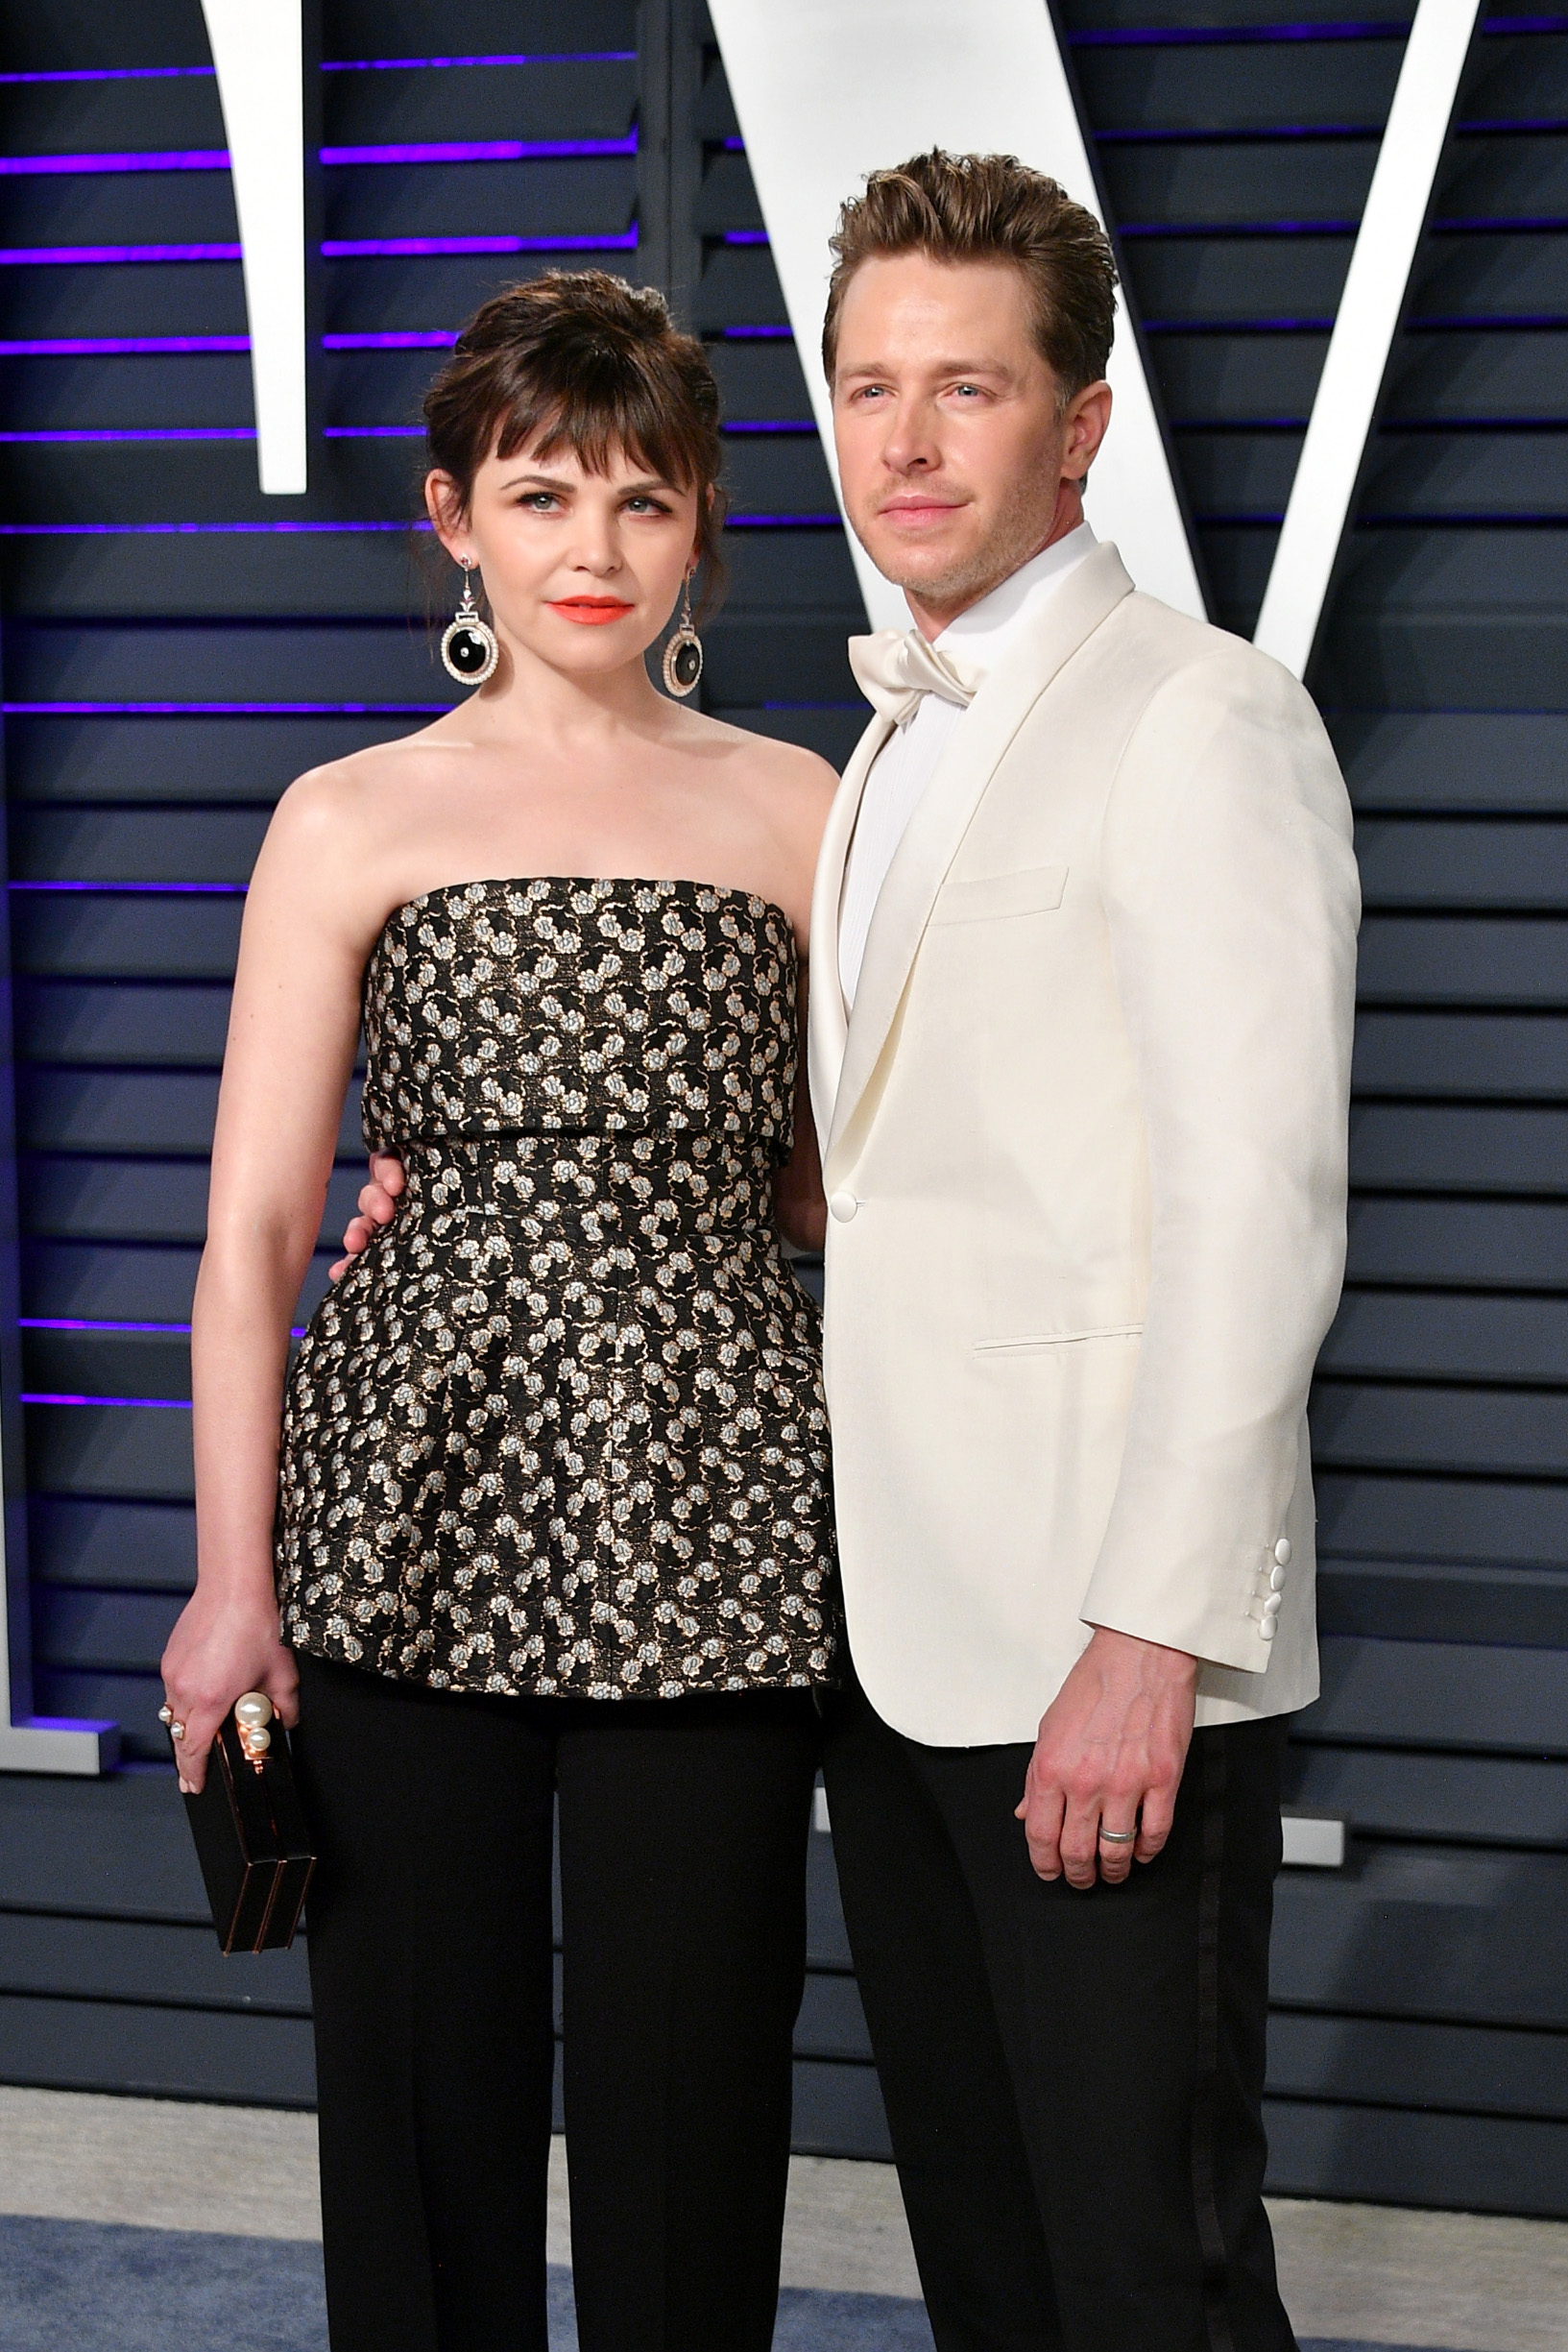 BEVERLY HILLS, CA - FEBRUARY 24:  Ginnifer Goodwin (L) and Josh Dallas attend the 2019 Vanity Fair Oscar Party hosted by Radhika Jones at Wallis Annenberg Center for the Performing Arts on February 24, 2019 in Beverly Hills, California.  (Photo by Dia Dipasupil/Getty Images)